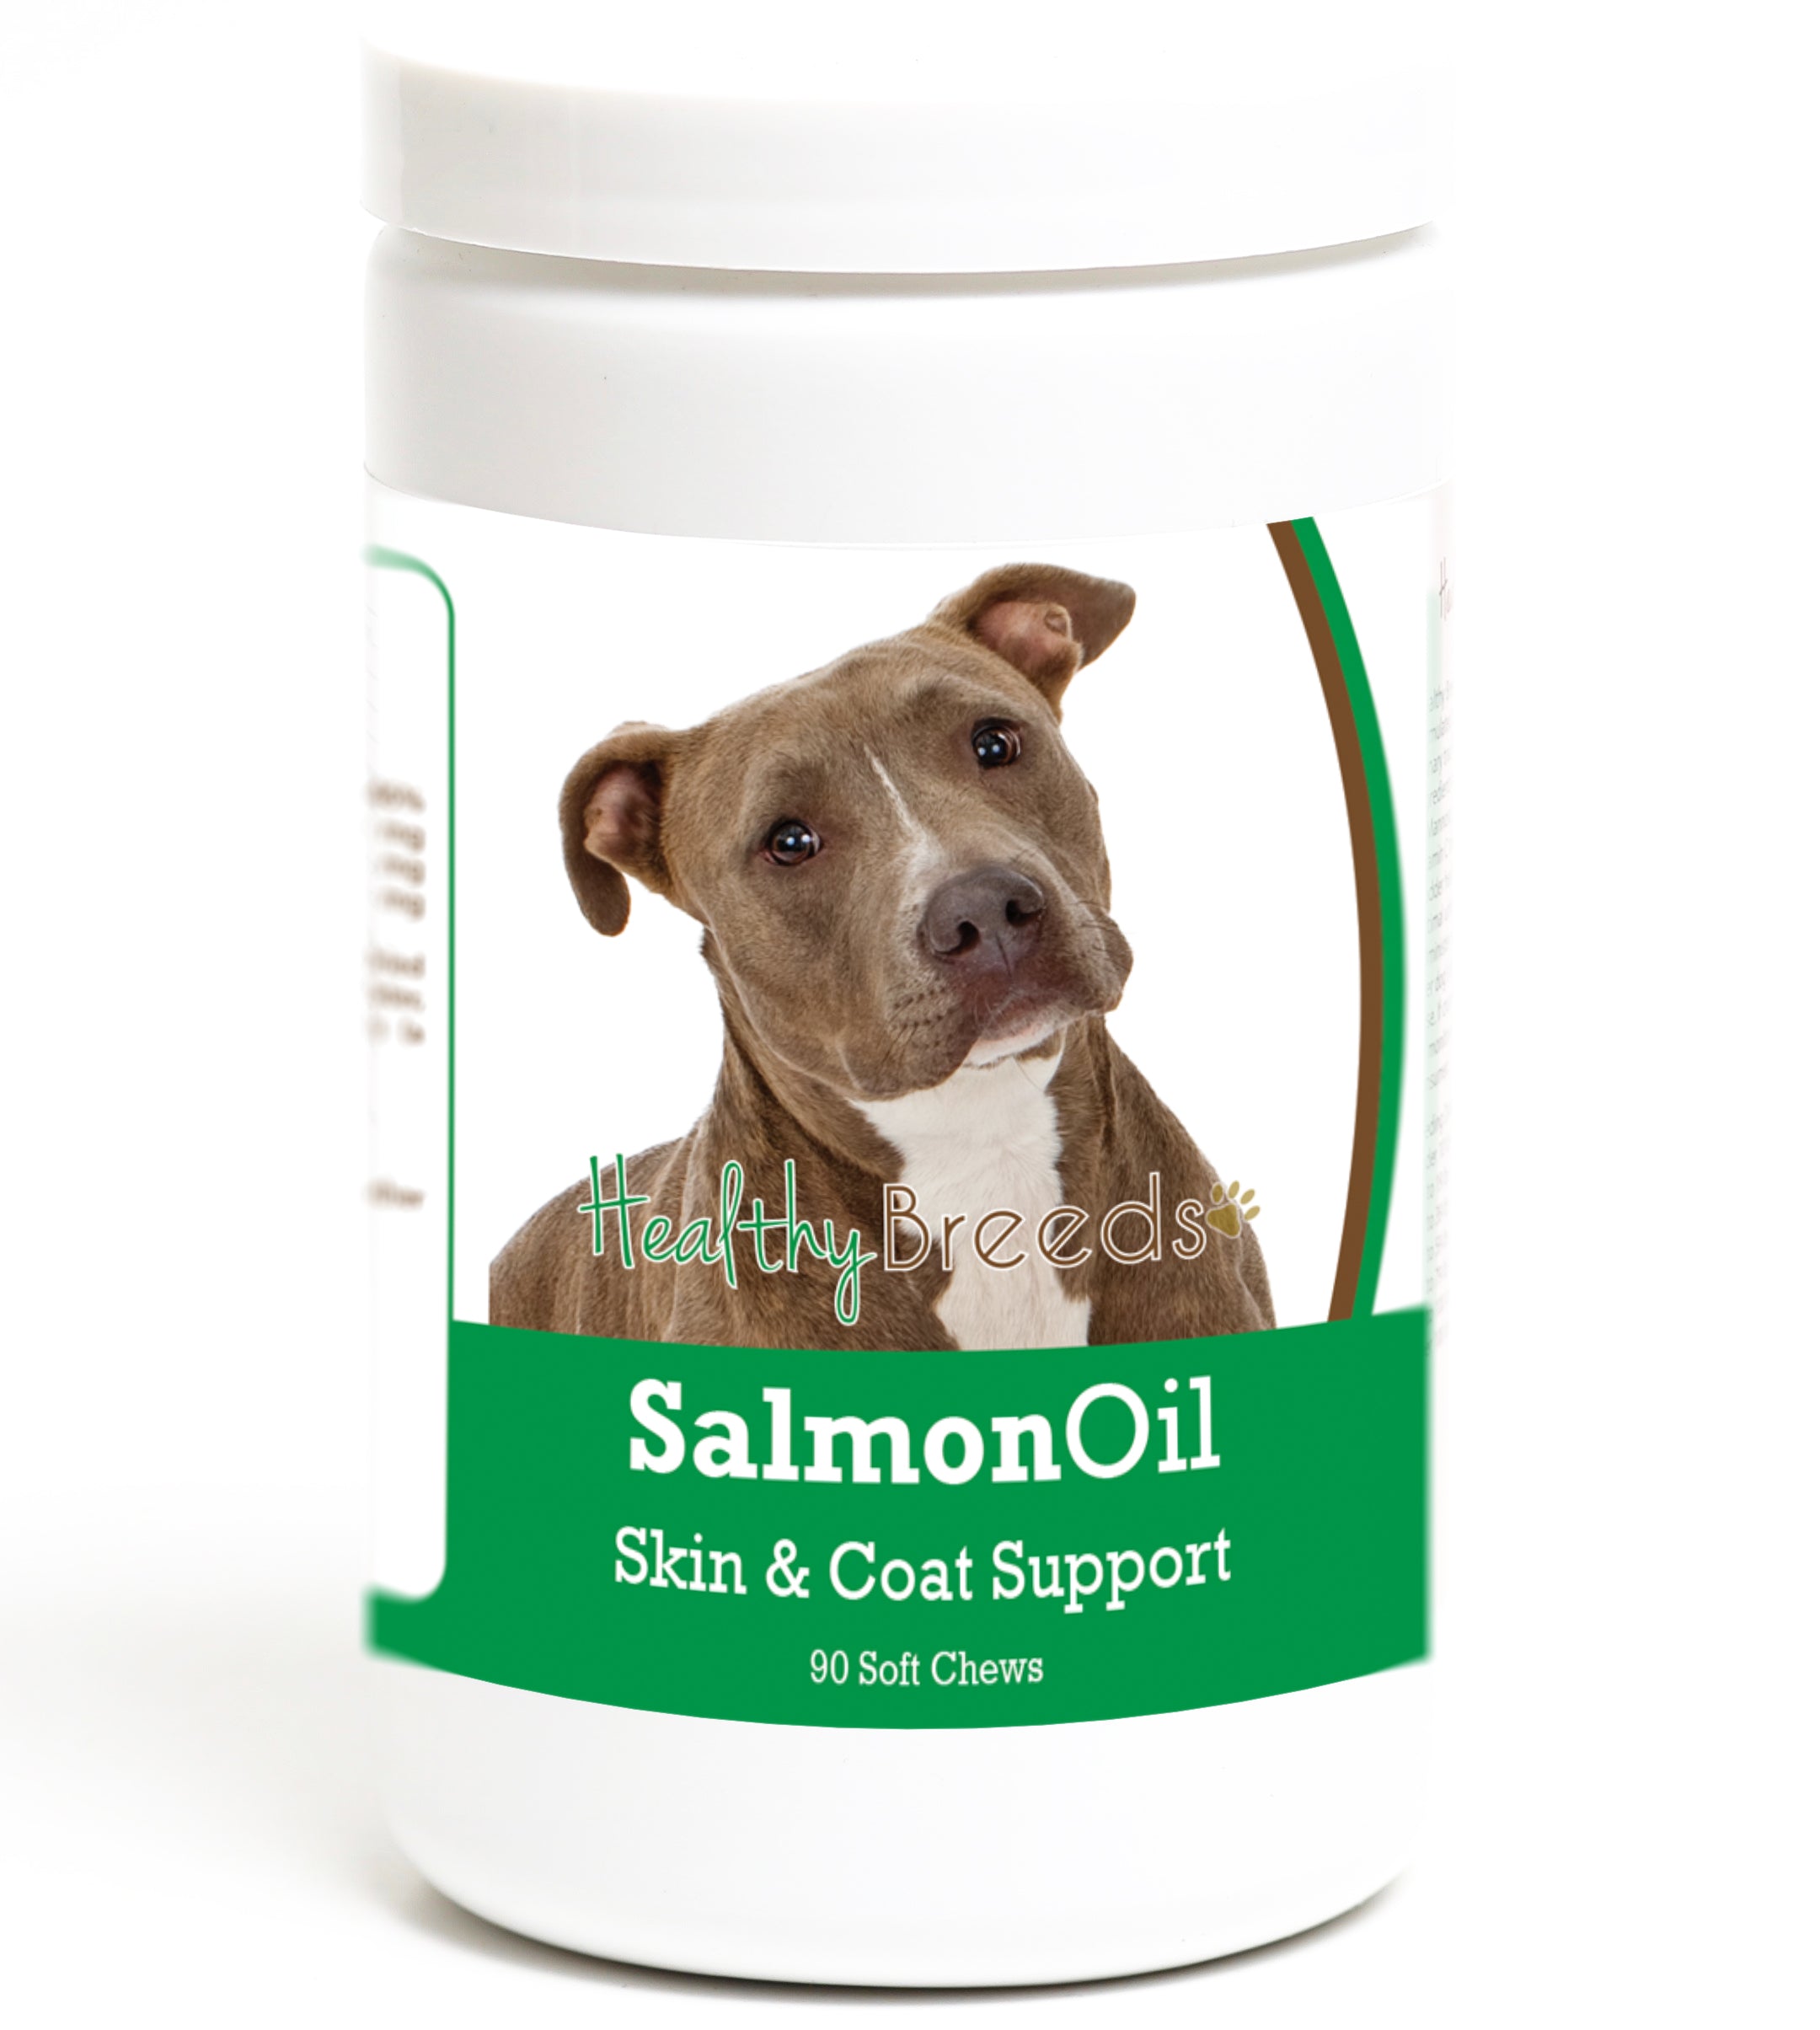 Pit Bull Salmon Oil Soft Chews 90 Count